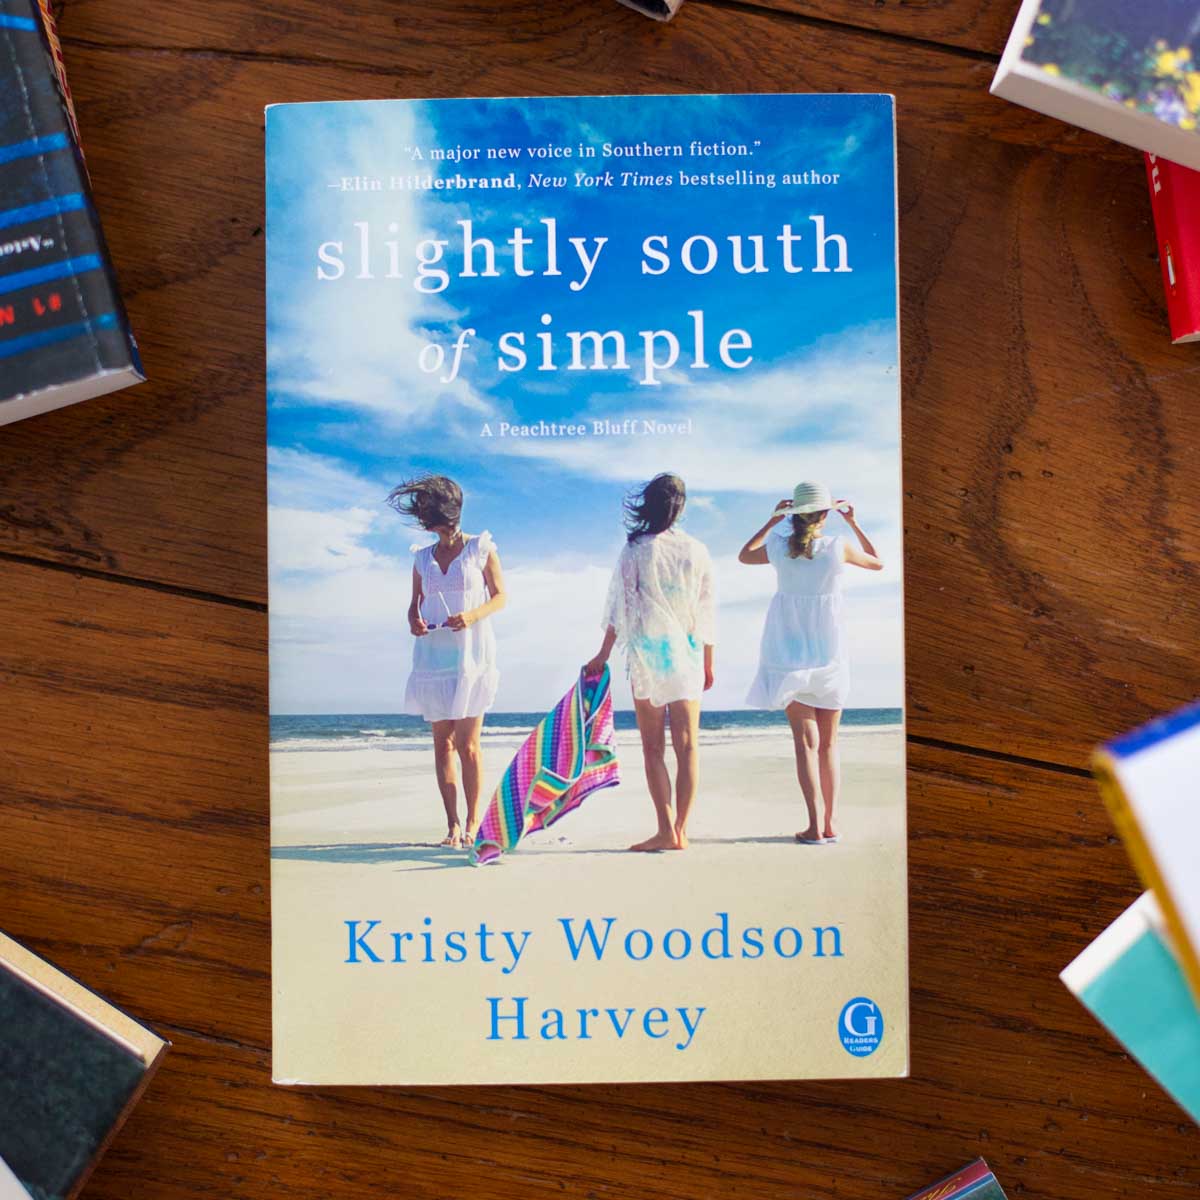 A copy of Slightly South of Simple sits on a table.